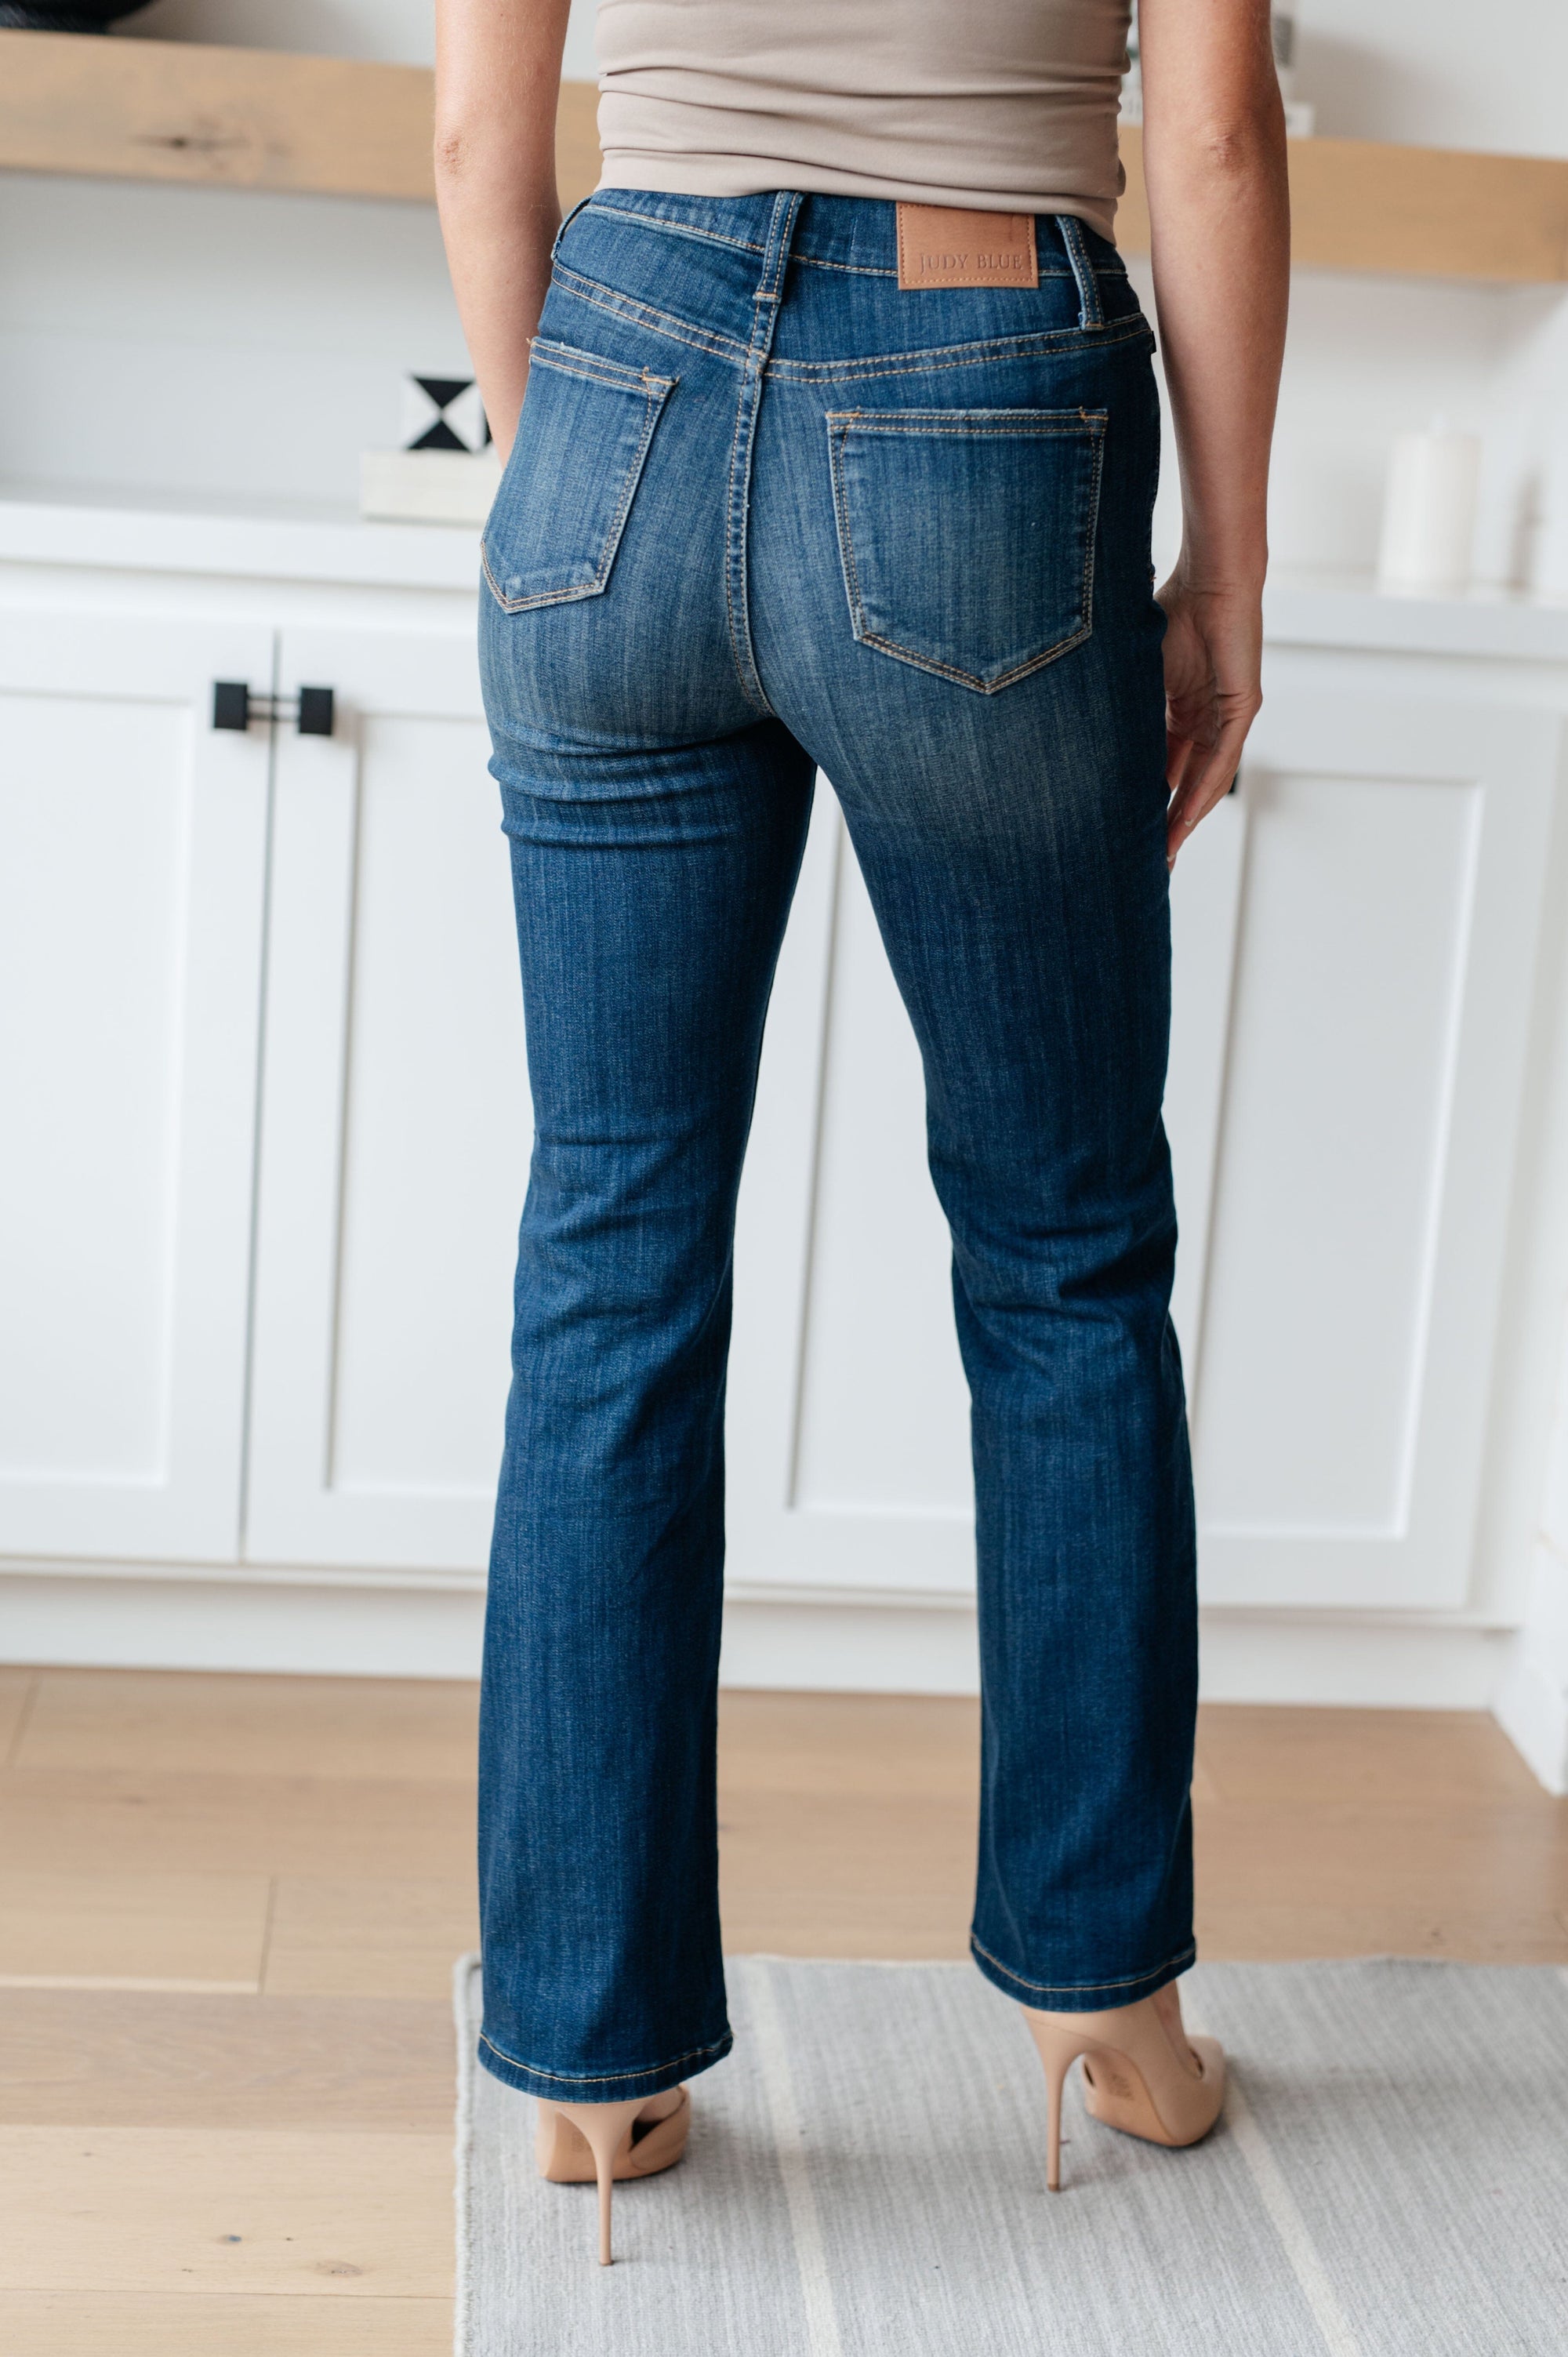 Pull-On Bootcut Jeans